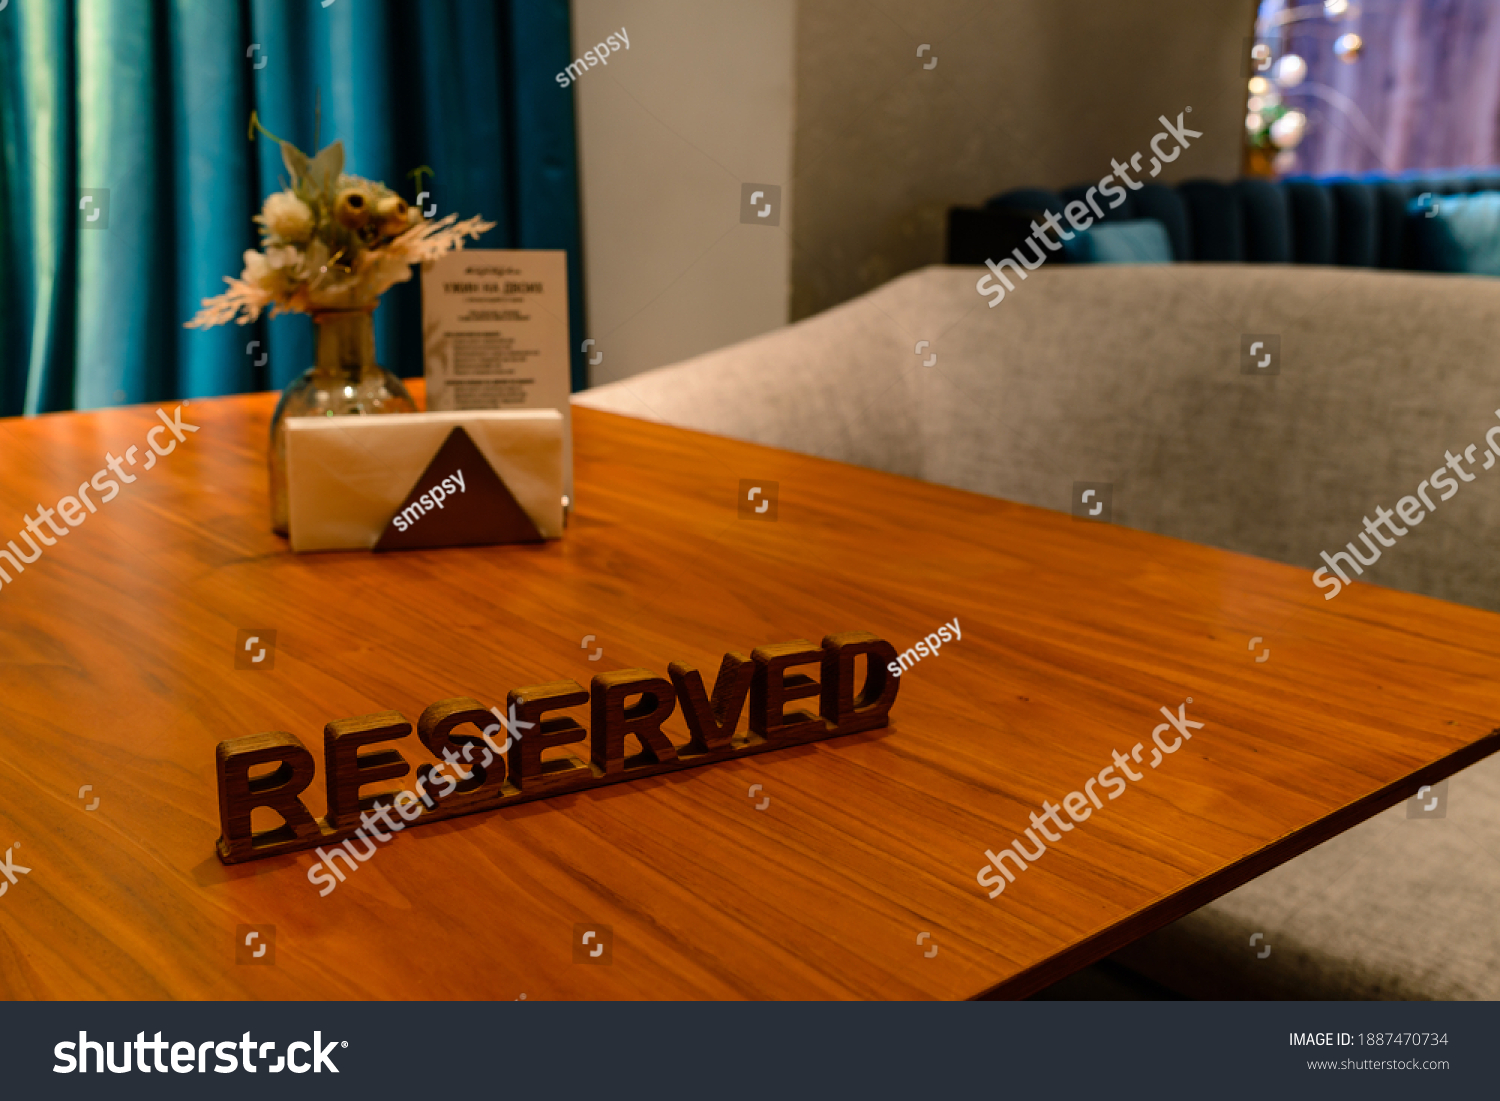 A modern idea for a reserved table with the inscription Reservation of your place. Idea restaurants the inscription reserved on a wooden table in a cafe #1887470734